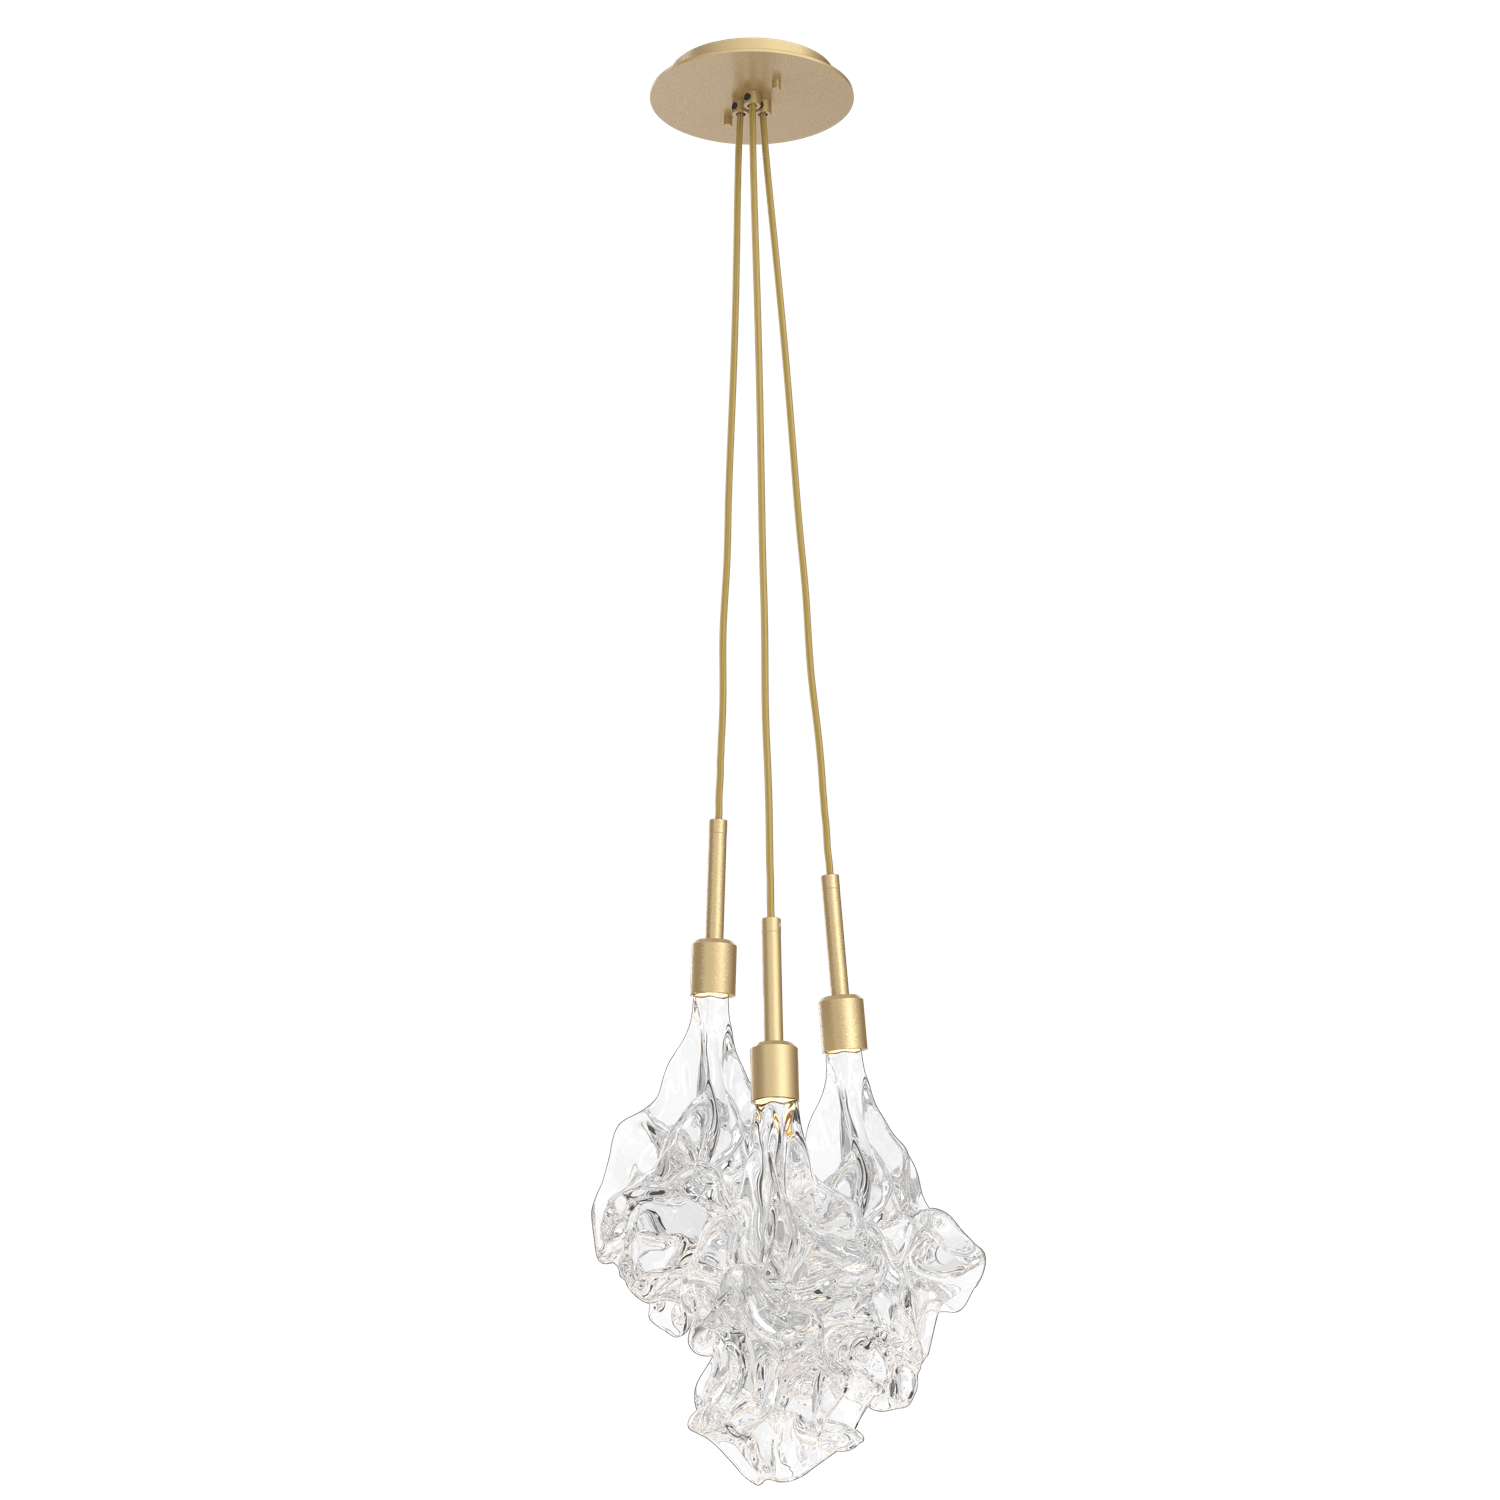 LAB0059-0A-GB-Hammerton-Studio-Blossom-3-light-cluster-pendant-light-with-gilded-brass-finish-and-clear-handblown-crystal-glass-shades-and-LED-lamping